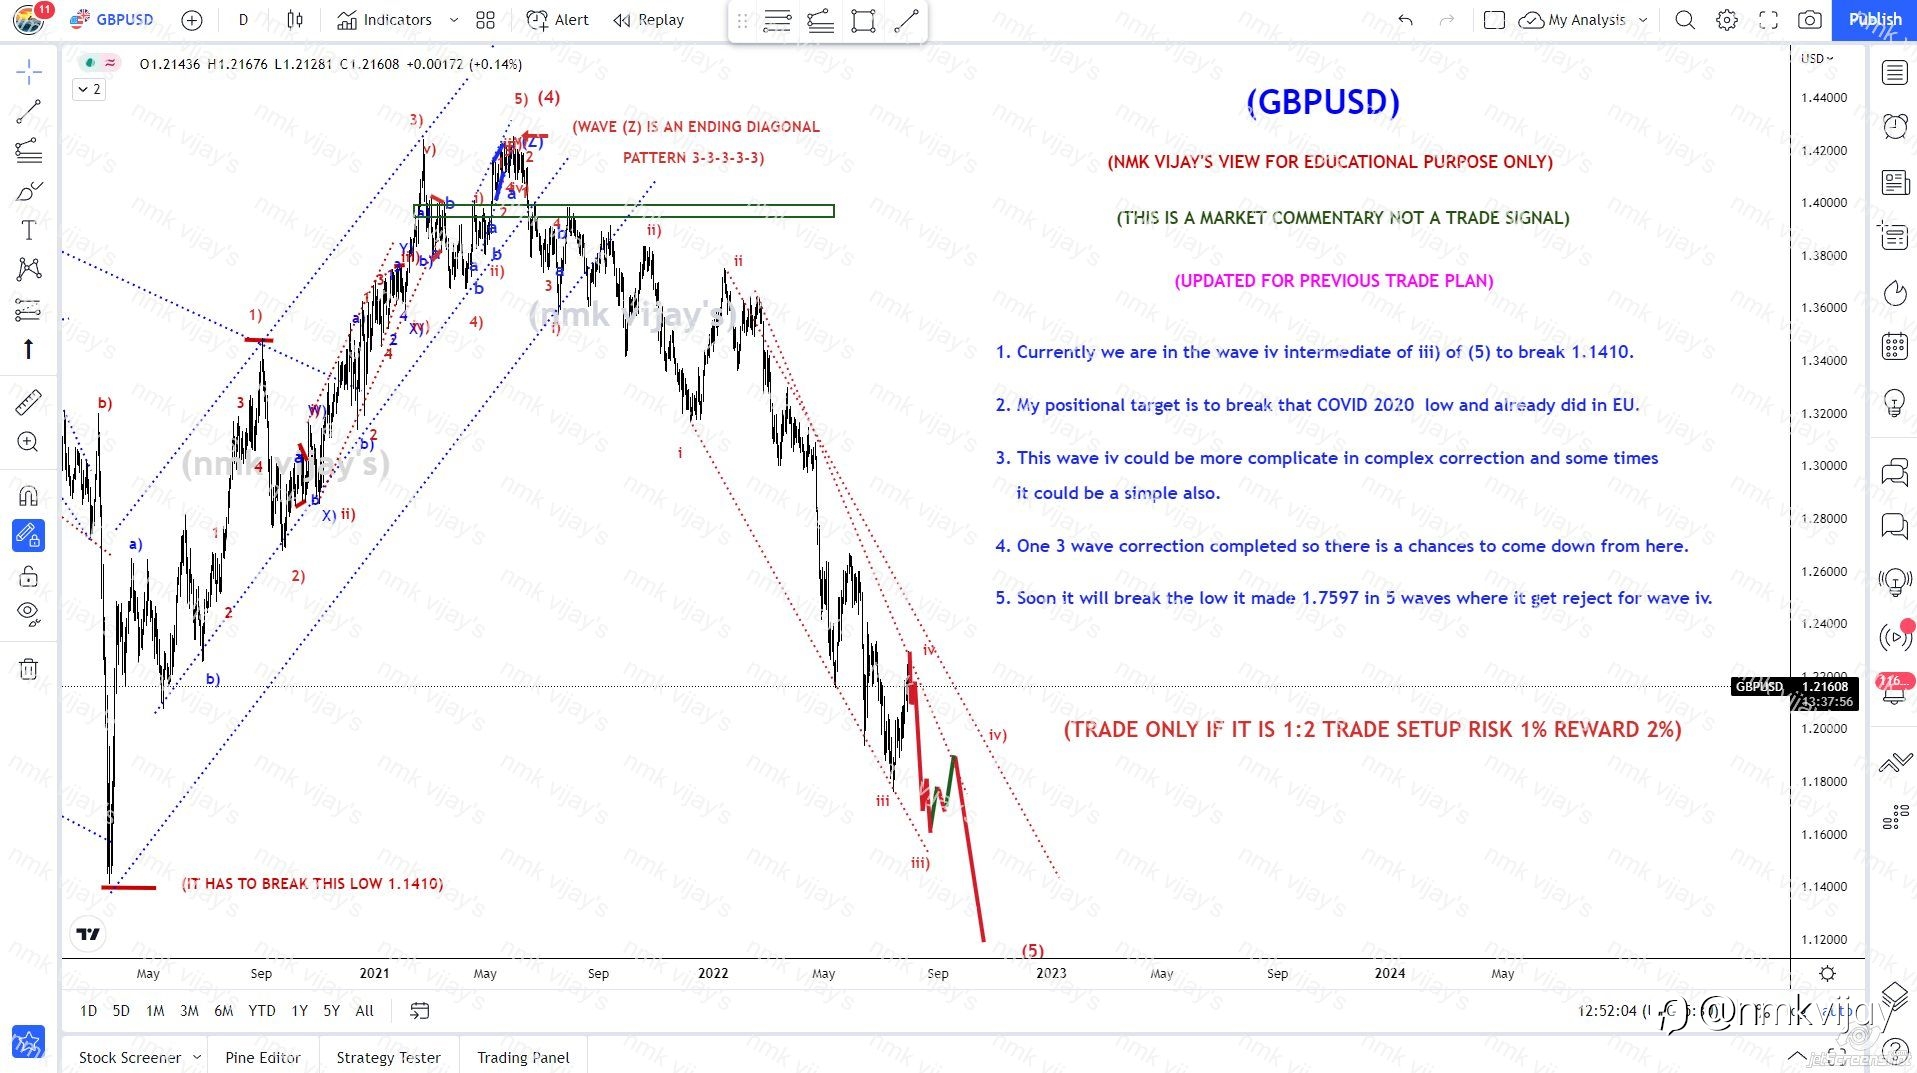 GBPUSD-To break 1.1759 in 5 waves for wave iii) or (5) after iv